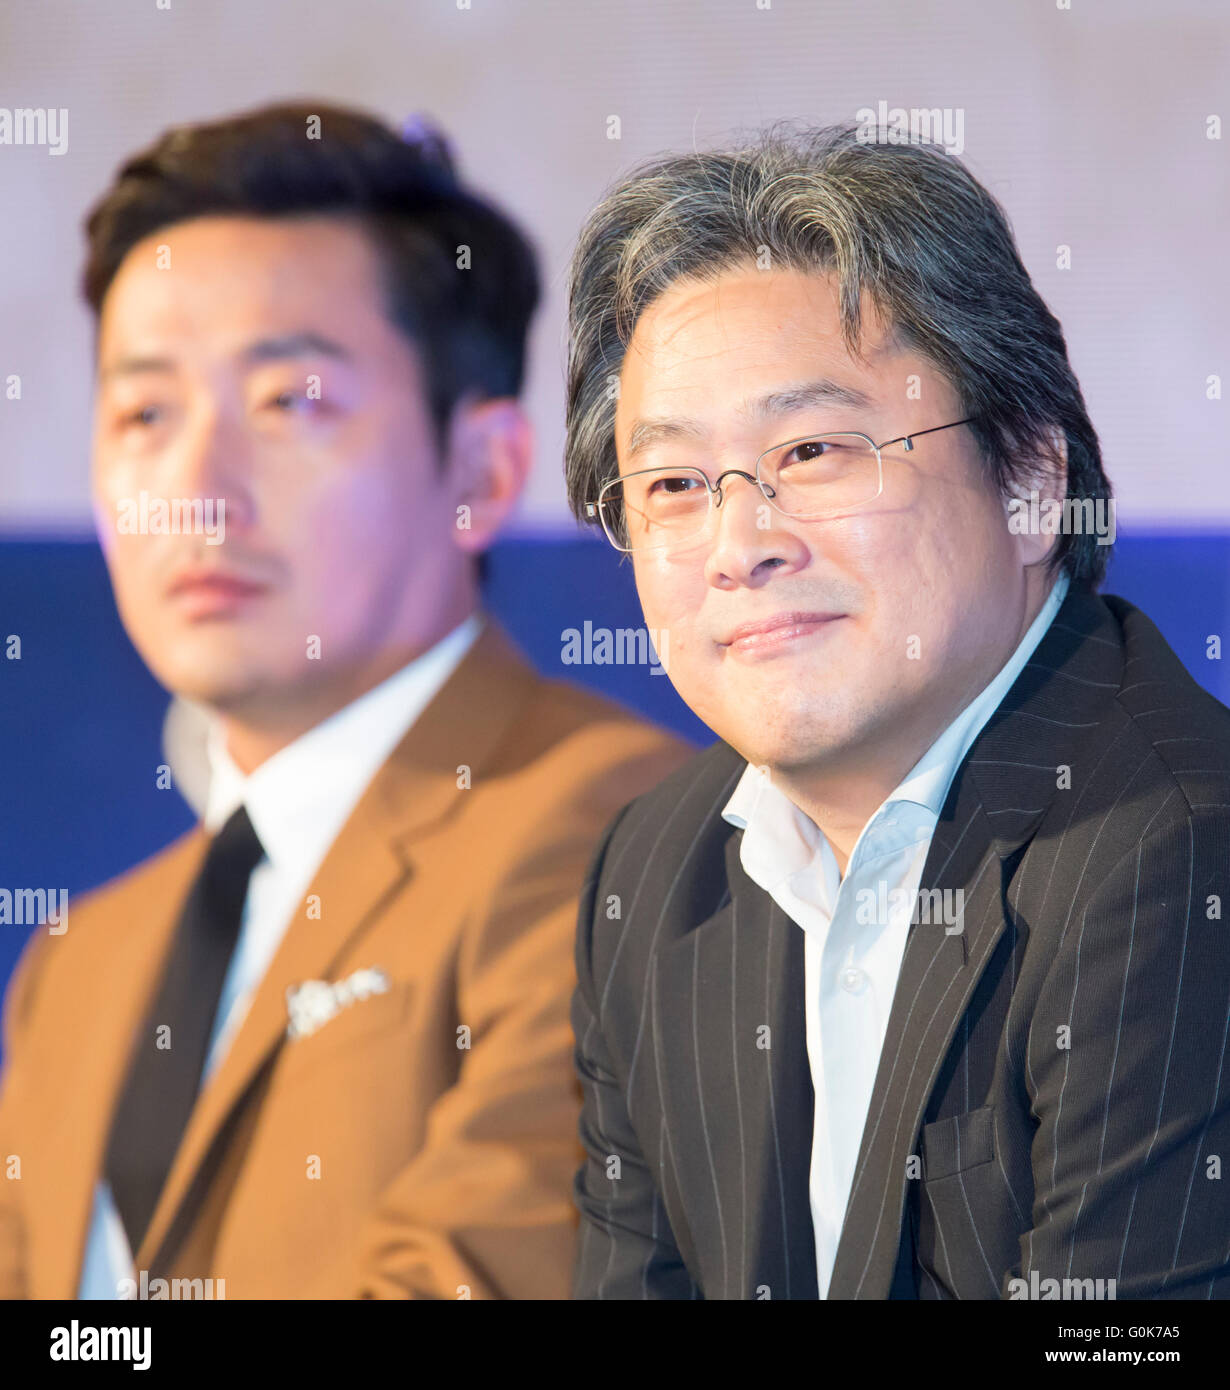 Ha Jung-woo and Park Chan-wook, May 2, 2016 : South Korean actor Ha Jung-woo  (L) and director Park Chan-wook attend a press conference for their film,  "The Handmaiden" in Seoul, South Korea.